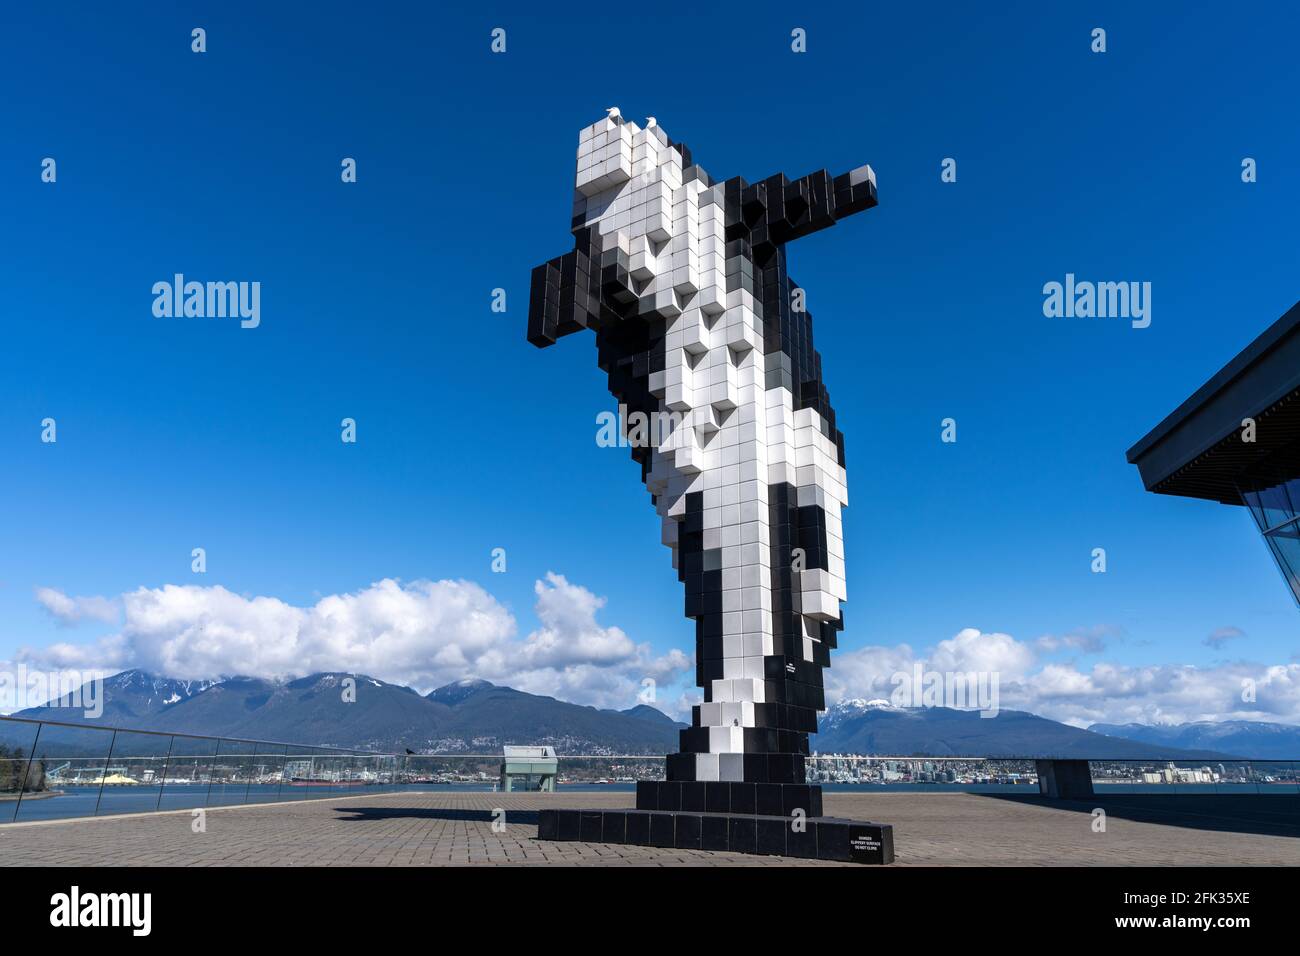 Digital Orca sculpture of a killer whale, next to the Vancouver Convention Centre. Canada Place Burrard Landing. Vancouver, BC, Canada. Stock Photo